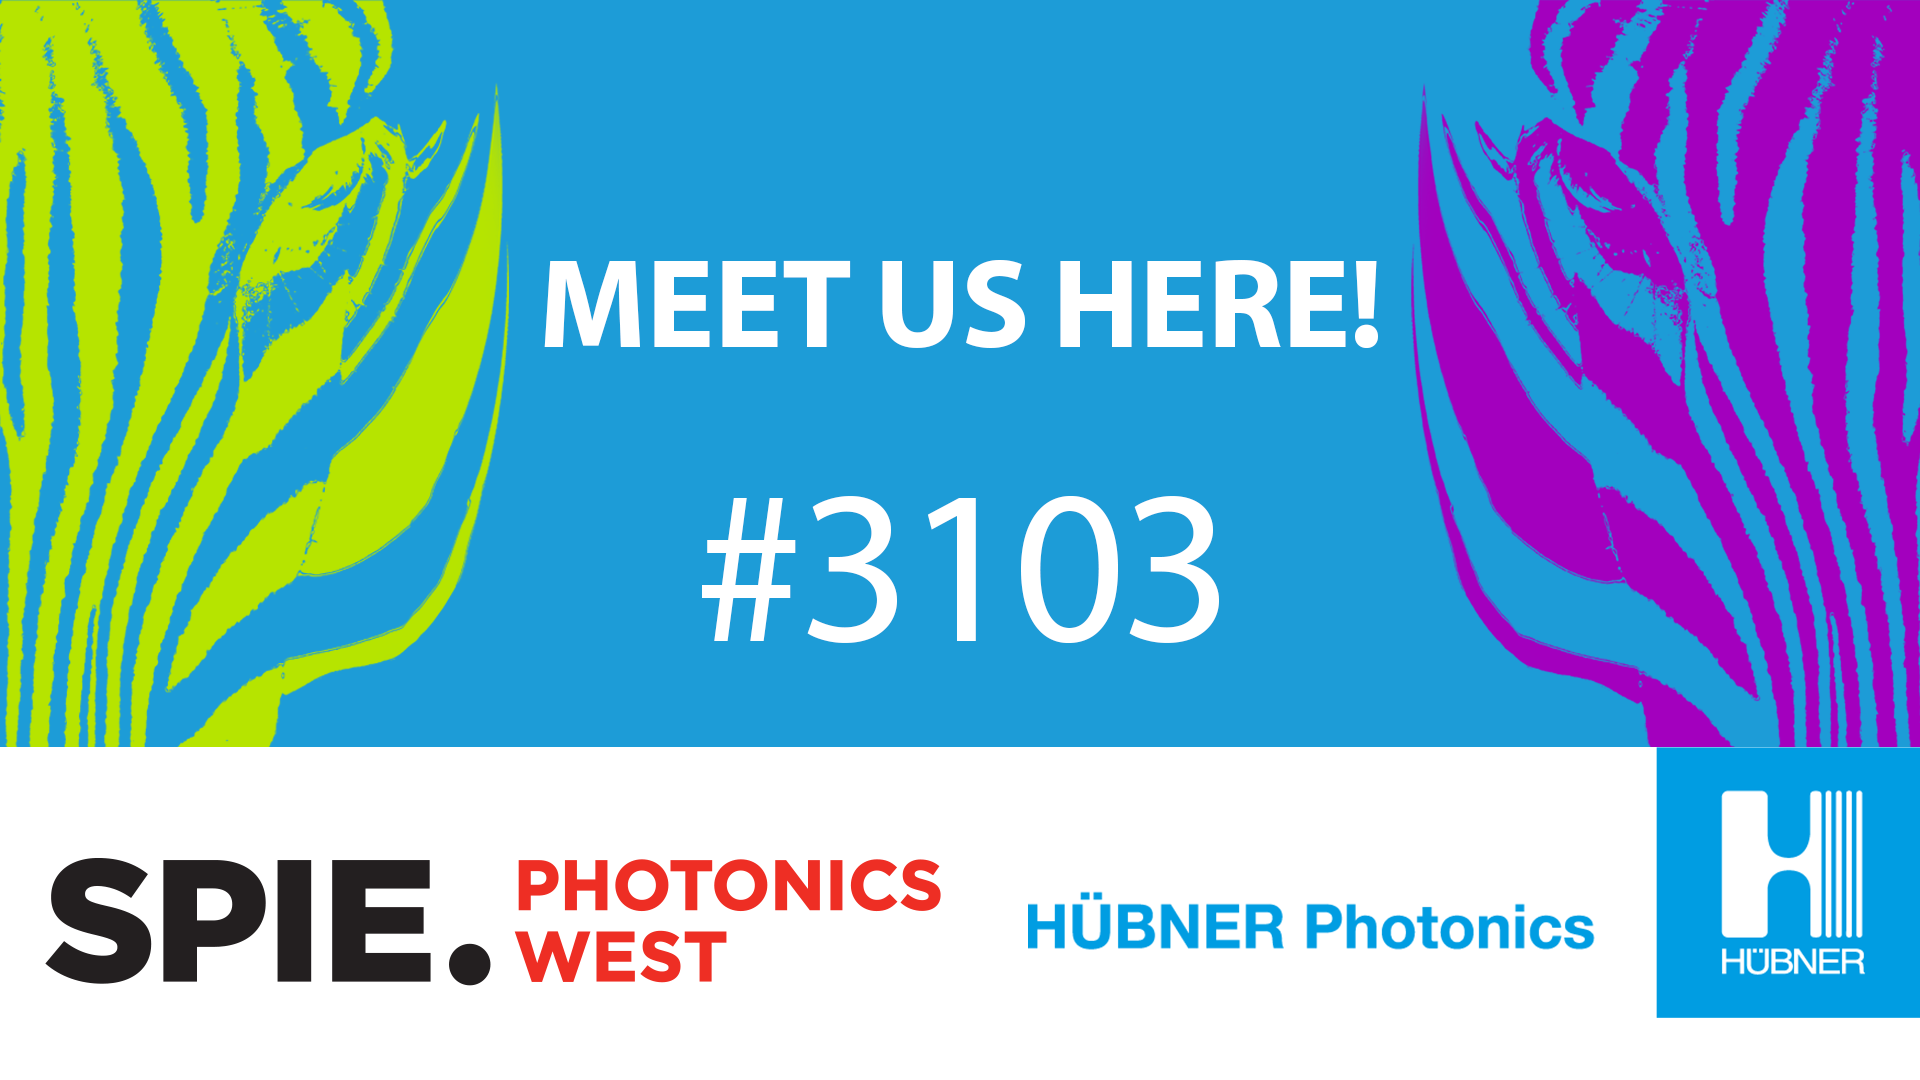 Meet HÜBNER Photonics at Photonics West in booth 3103